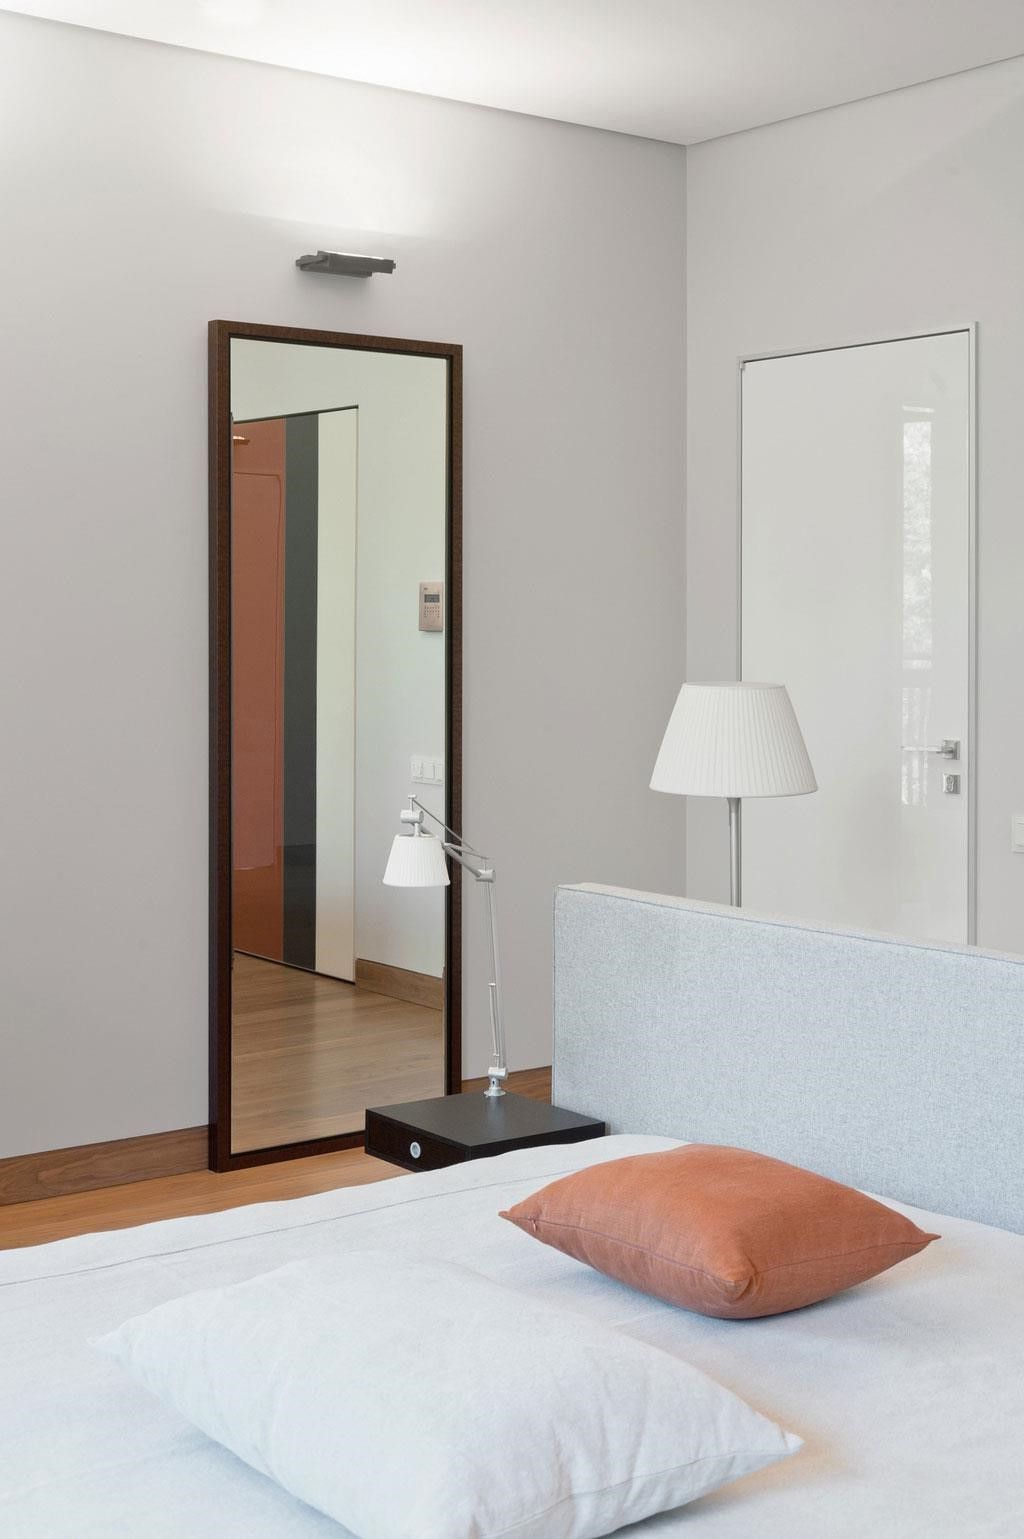 Wall Mirrors For Bedroom Within 2019 Wall Mirror Designs For Bedrooms Bedroom The Effect Of Mirrors (View 3 of 20)